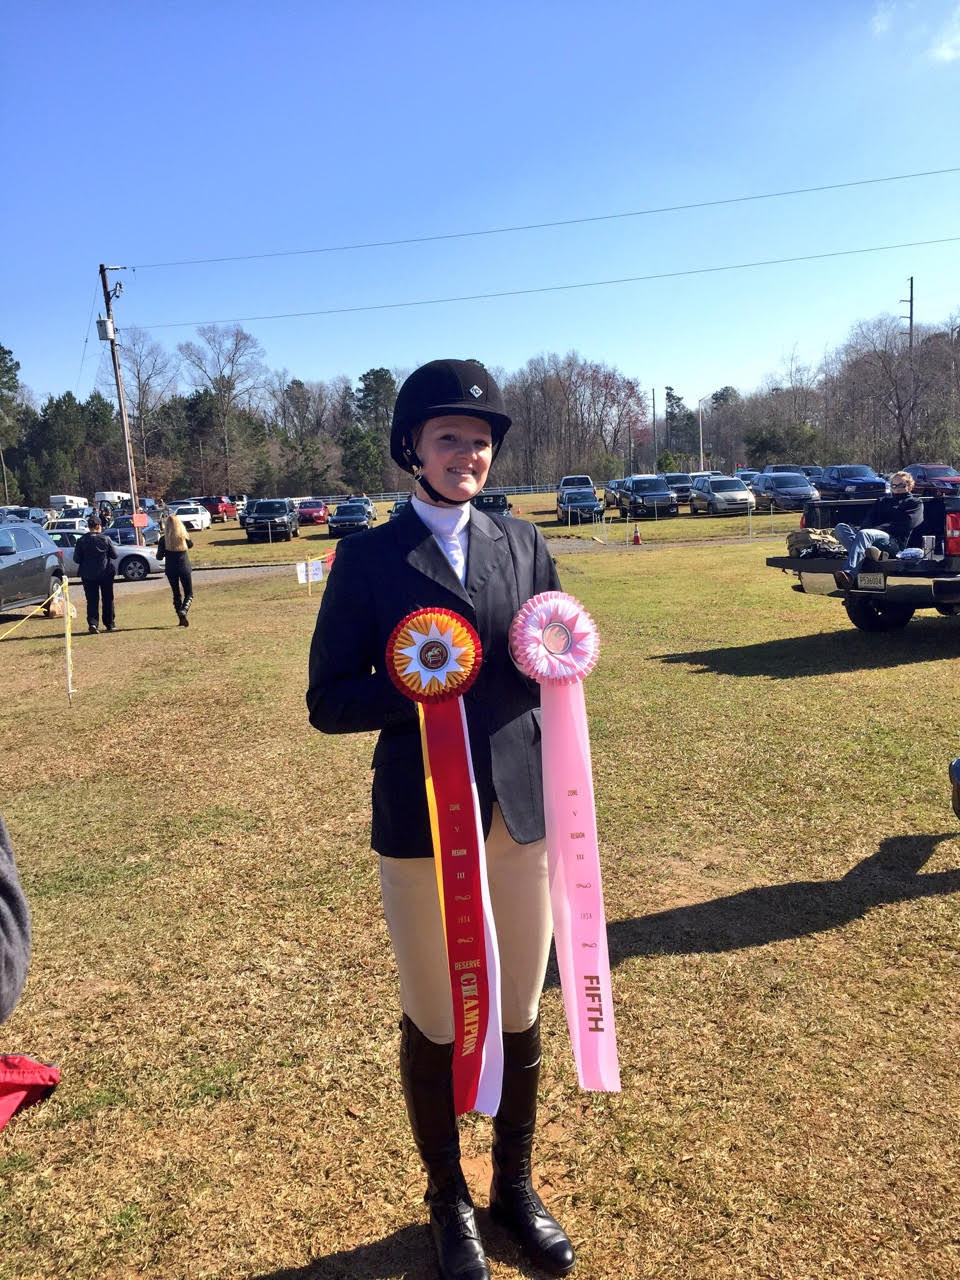 Rider Grace Edwards took home two ribbons from the regional competition in Charleston, qualifying for zones in the novice fences division with her reserve champion placing. Edwards is the first Wofford rider to compete in the postseason.